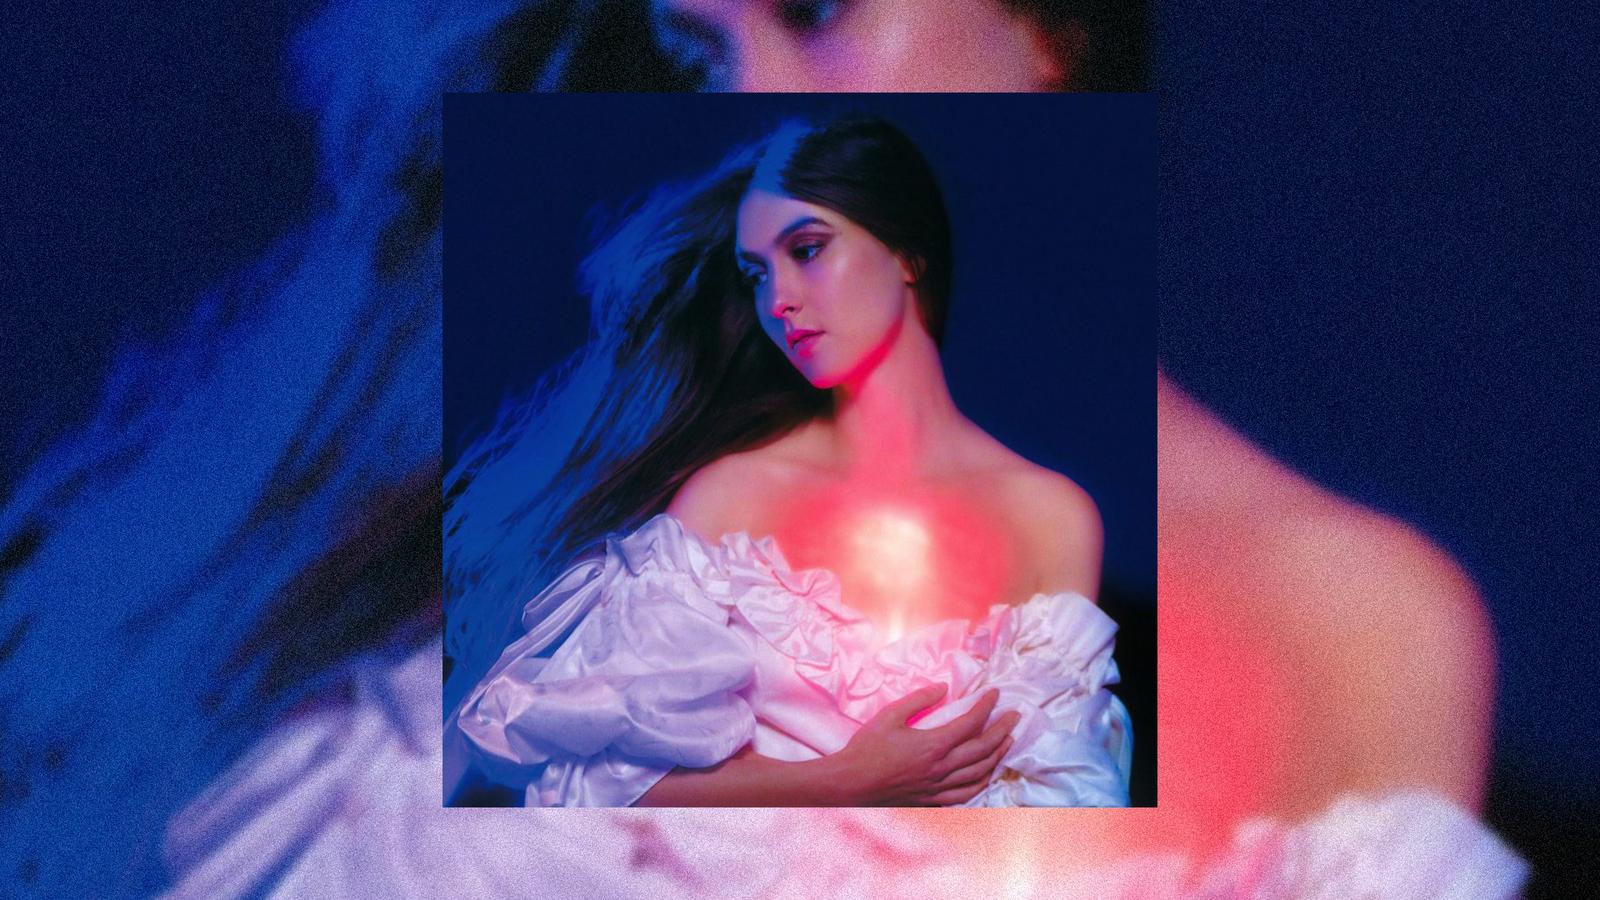 weyes blood And In The Darkness, Hearts Aglow cover